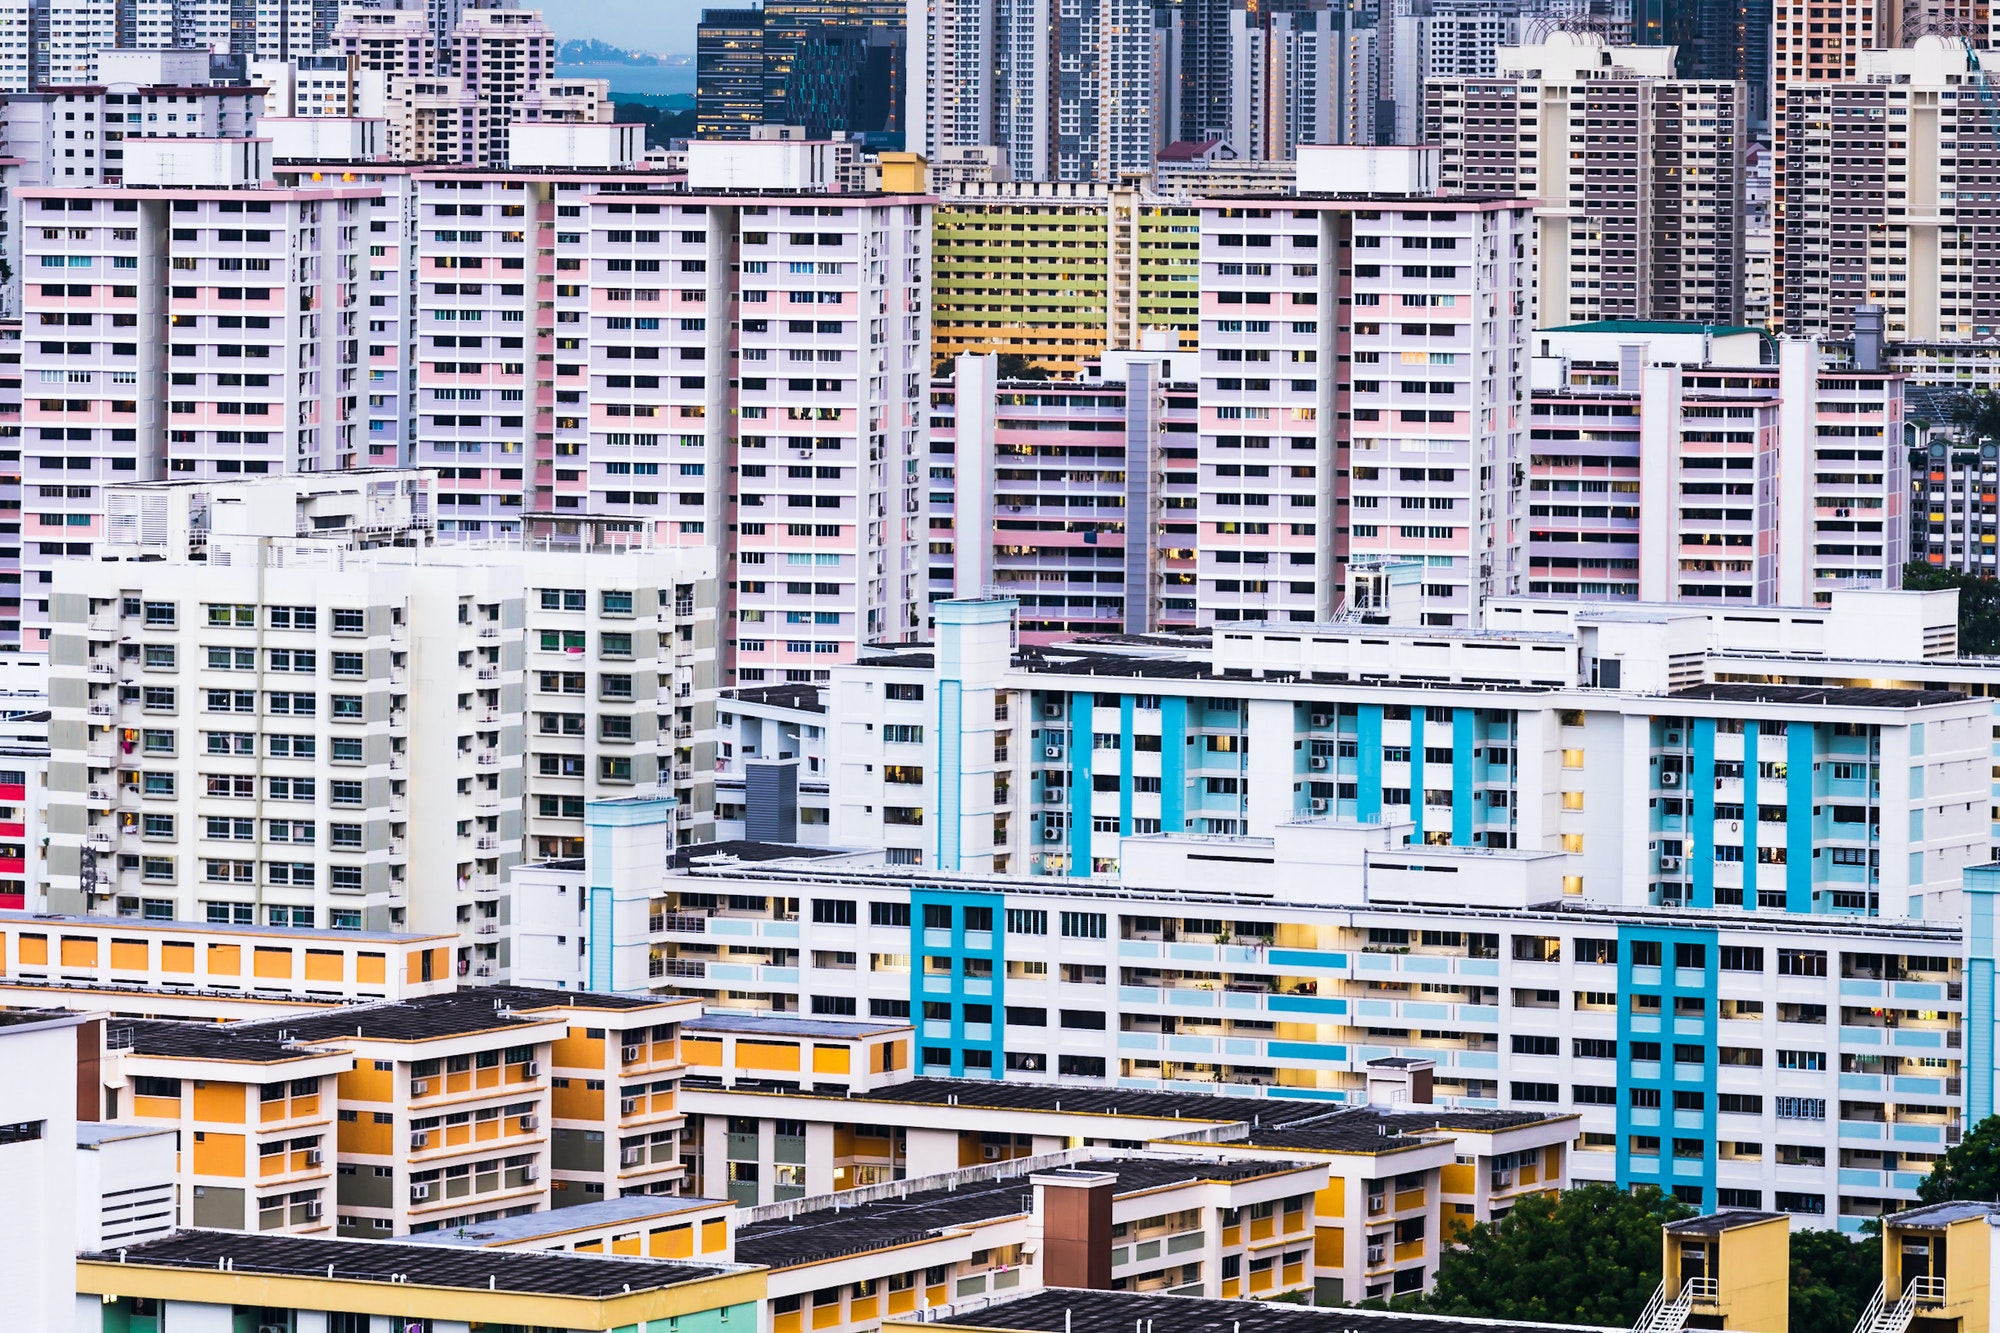 View of public housings in Singapore.